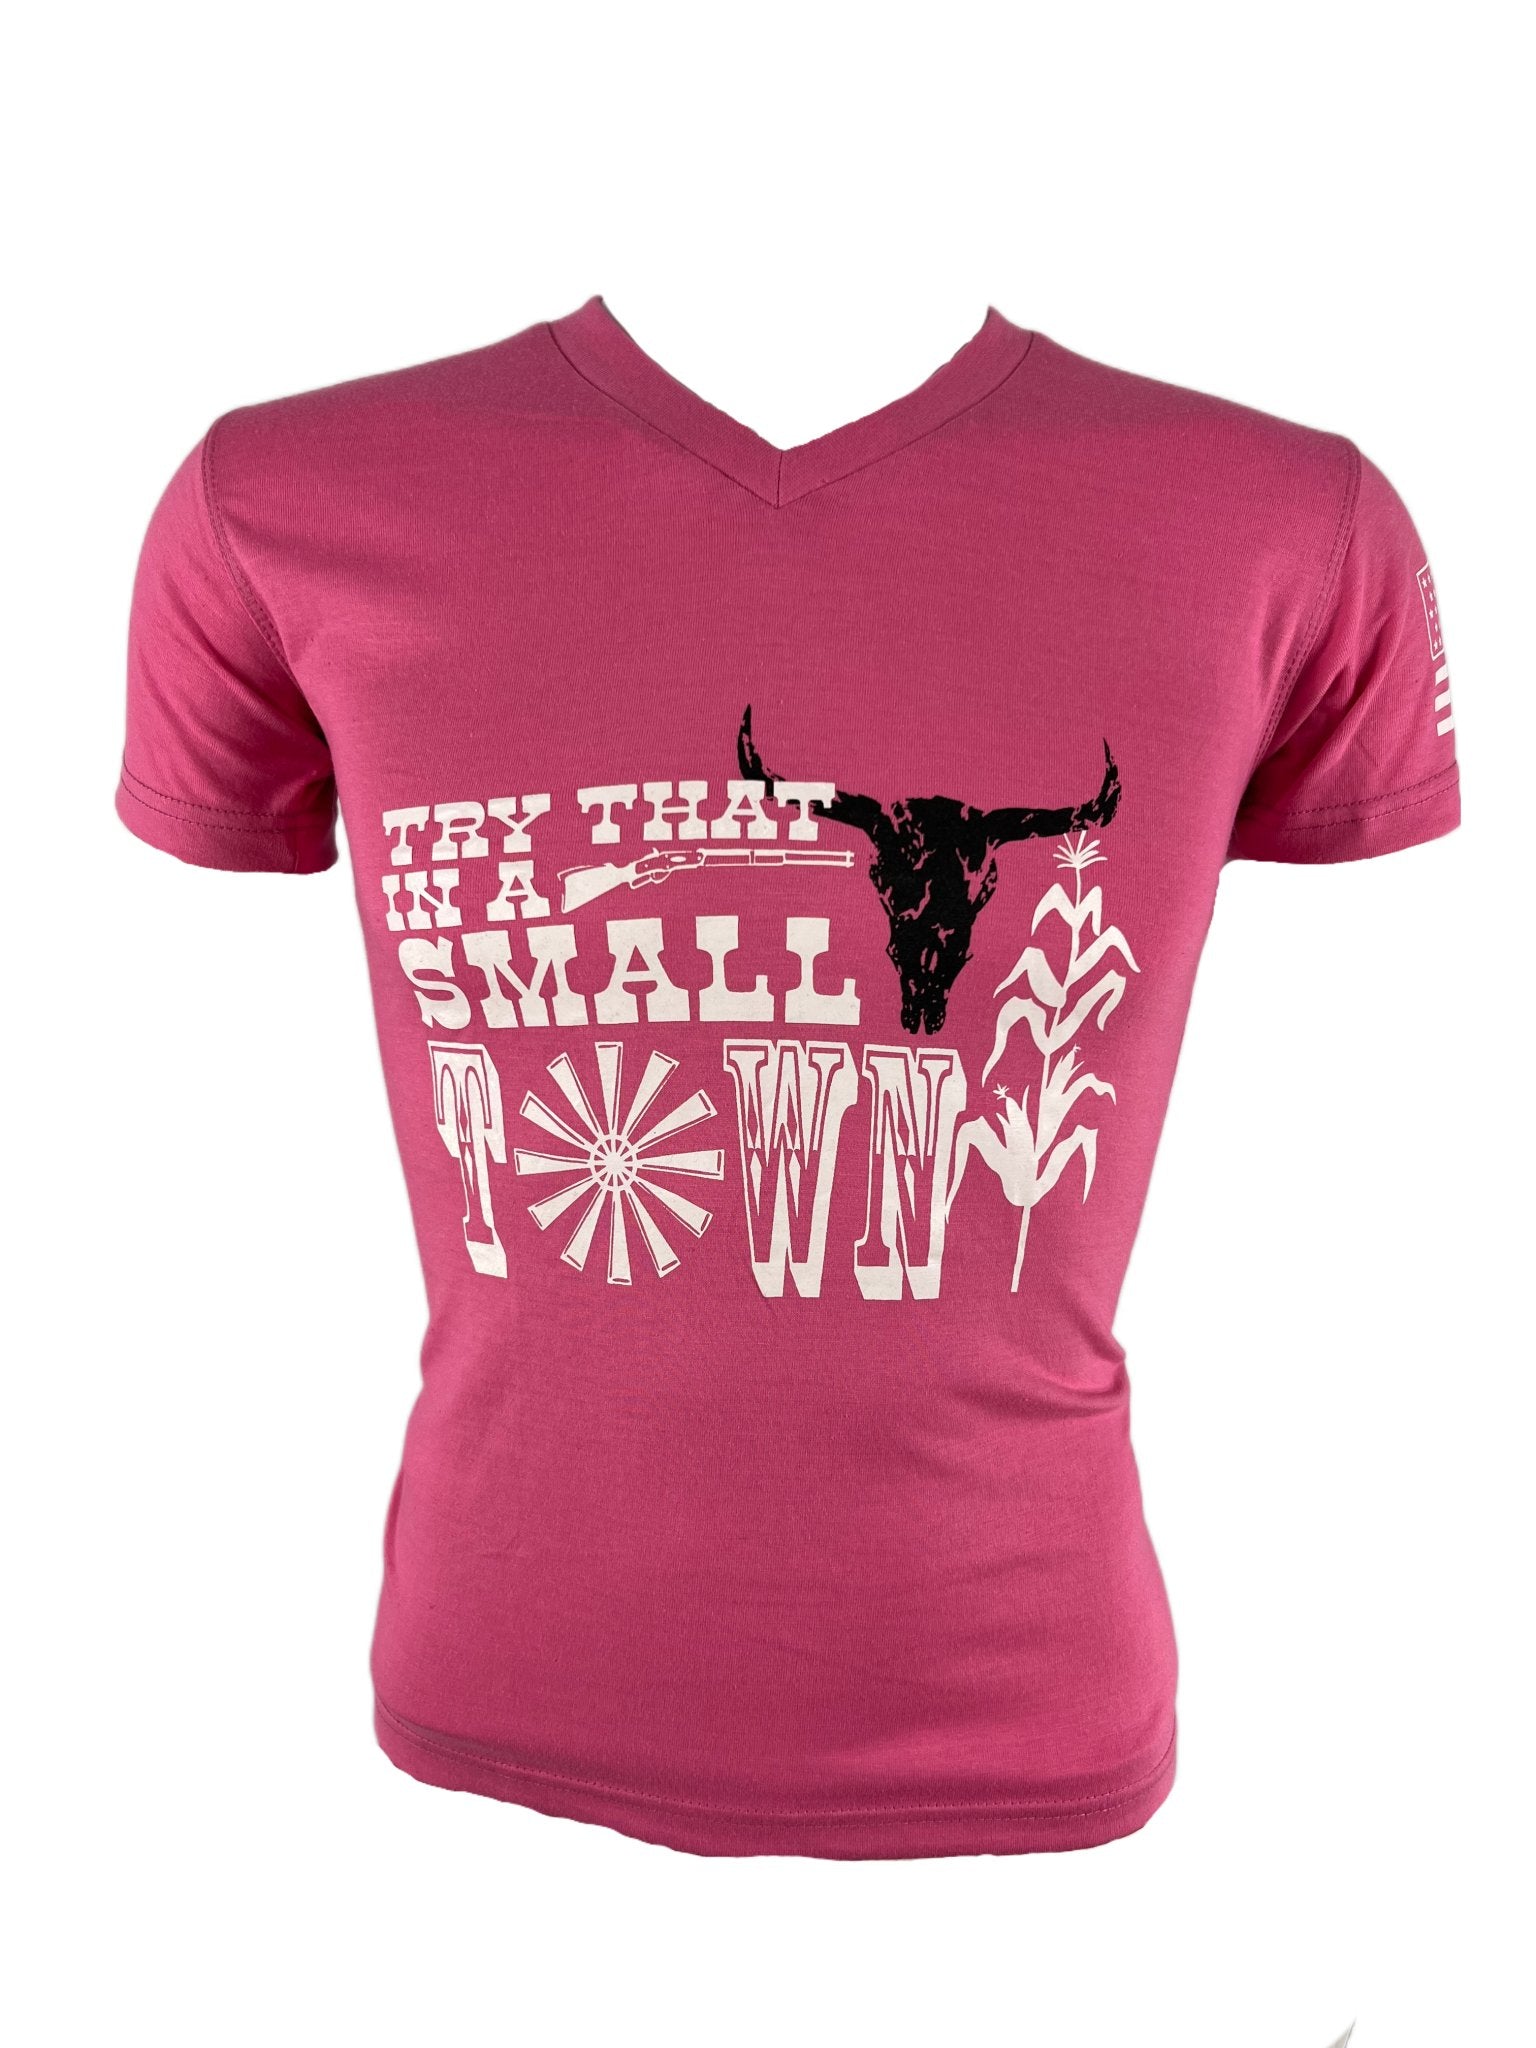 WOMEN’S SMALL TOWN TEE | TRY THAT IN A SMALL TOWN SHIRT - PINK | ALPHAUNLEASHED - ALPHAunleashed